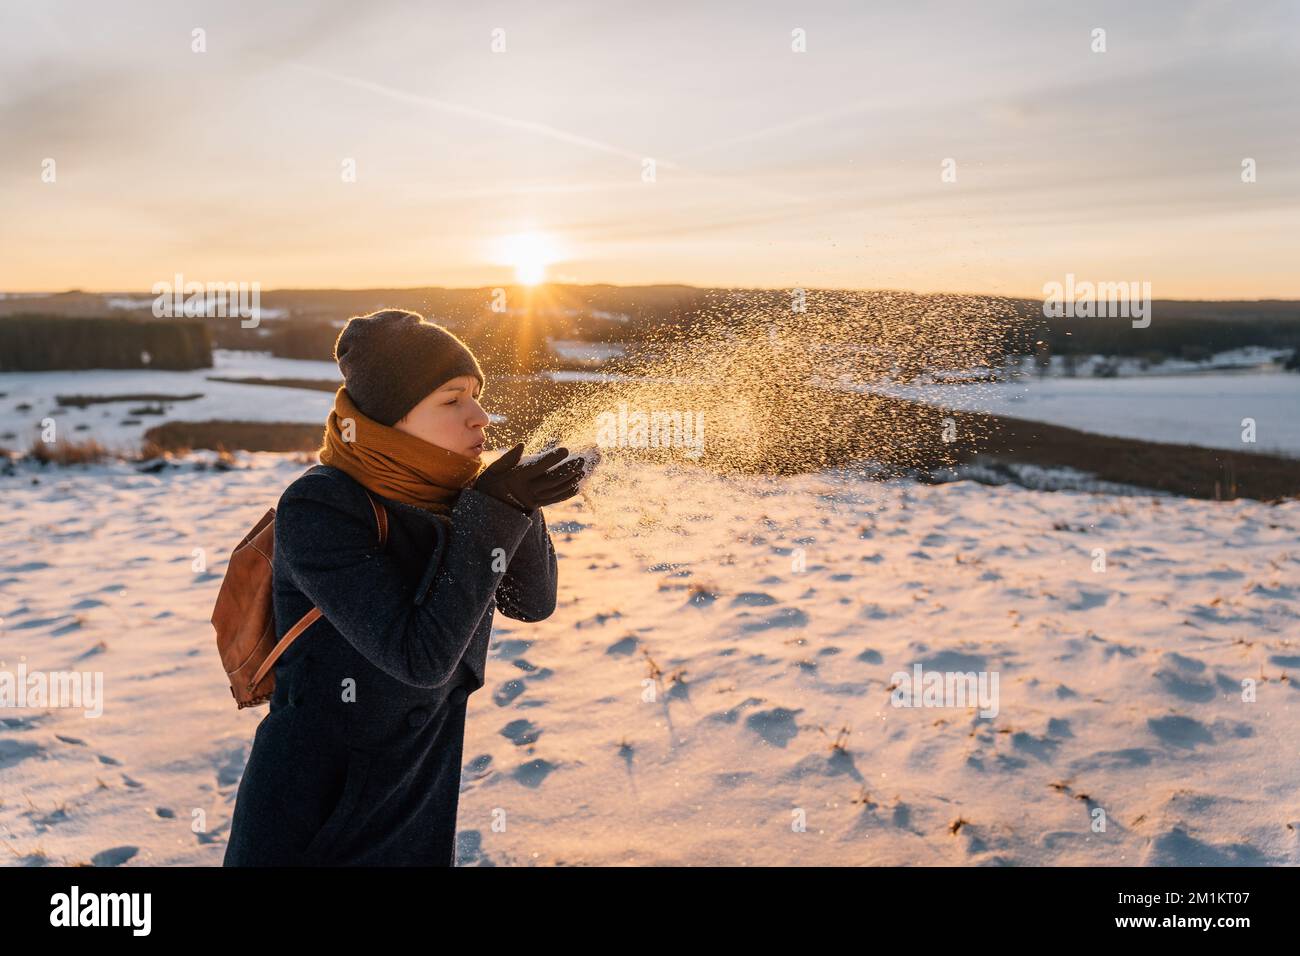 A woman on a snow-covered winter field blows snow off her palms Stock Photo